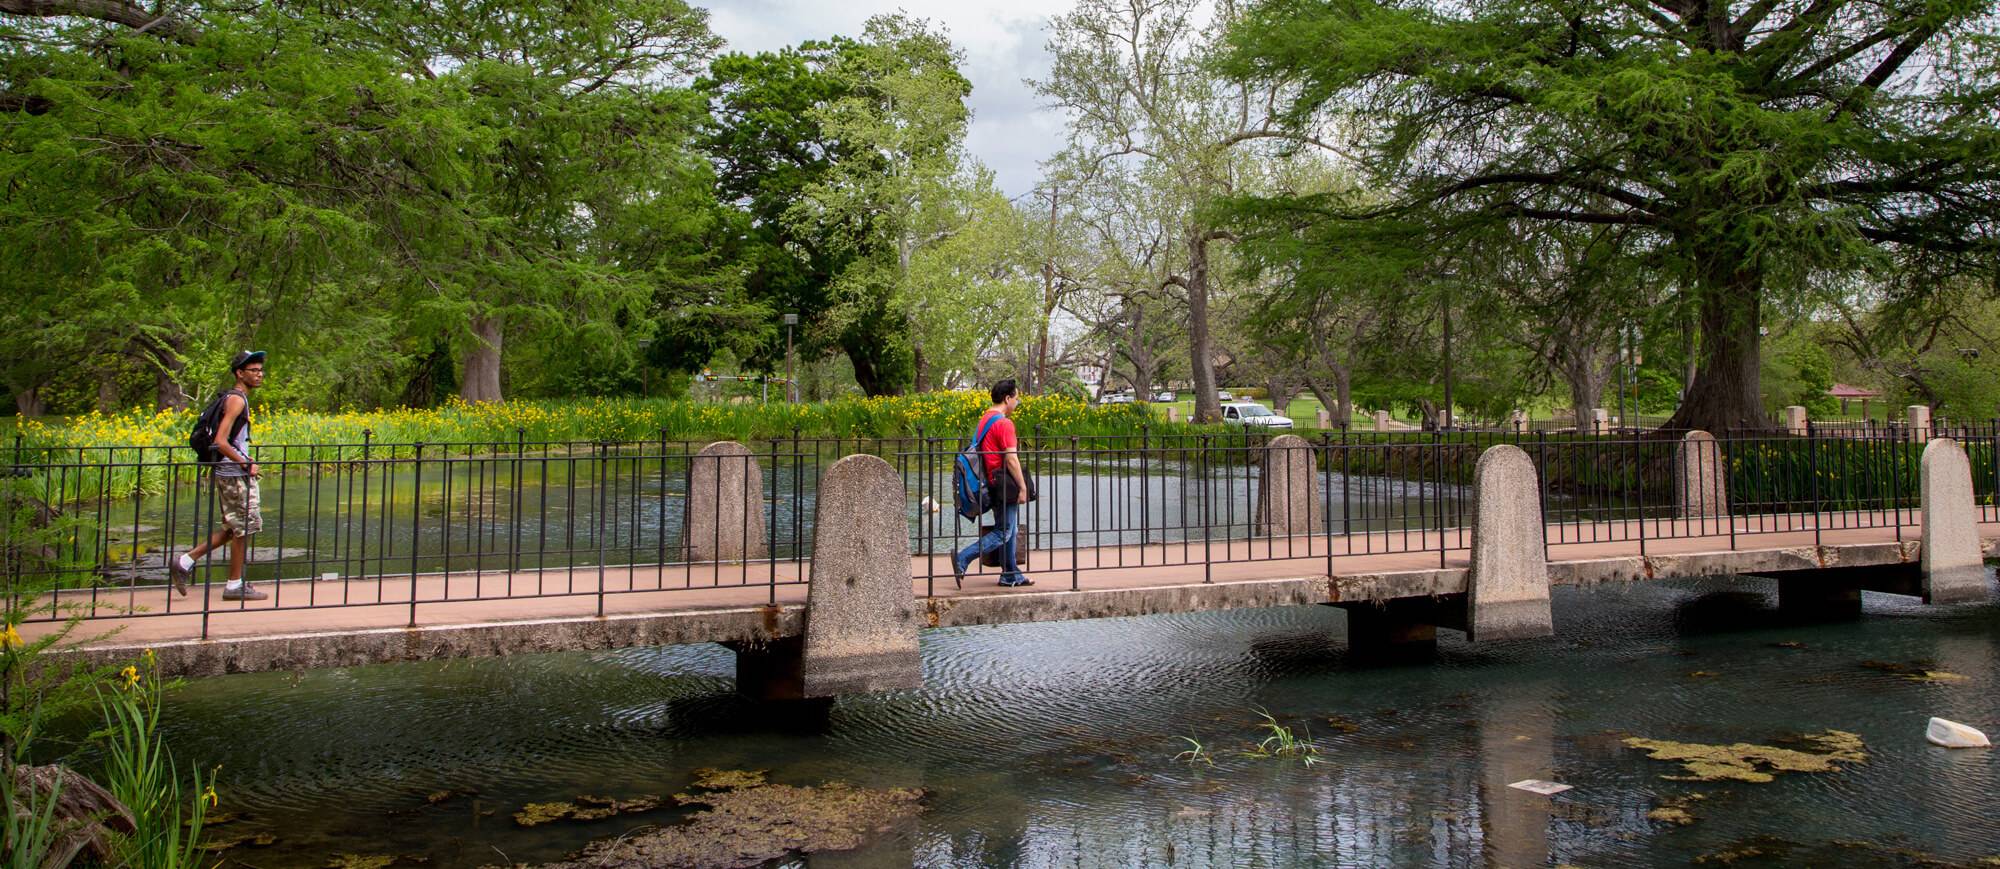 photo of students waling on bridge over a pond